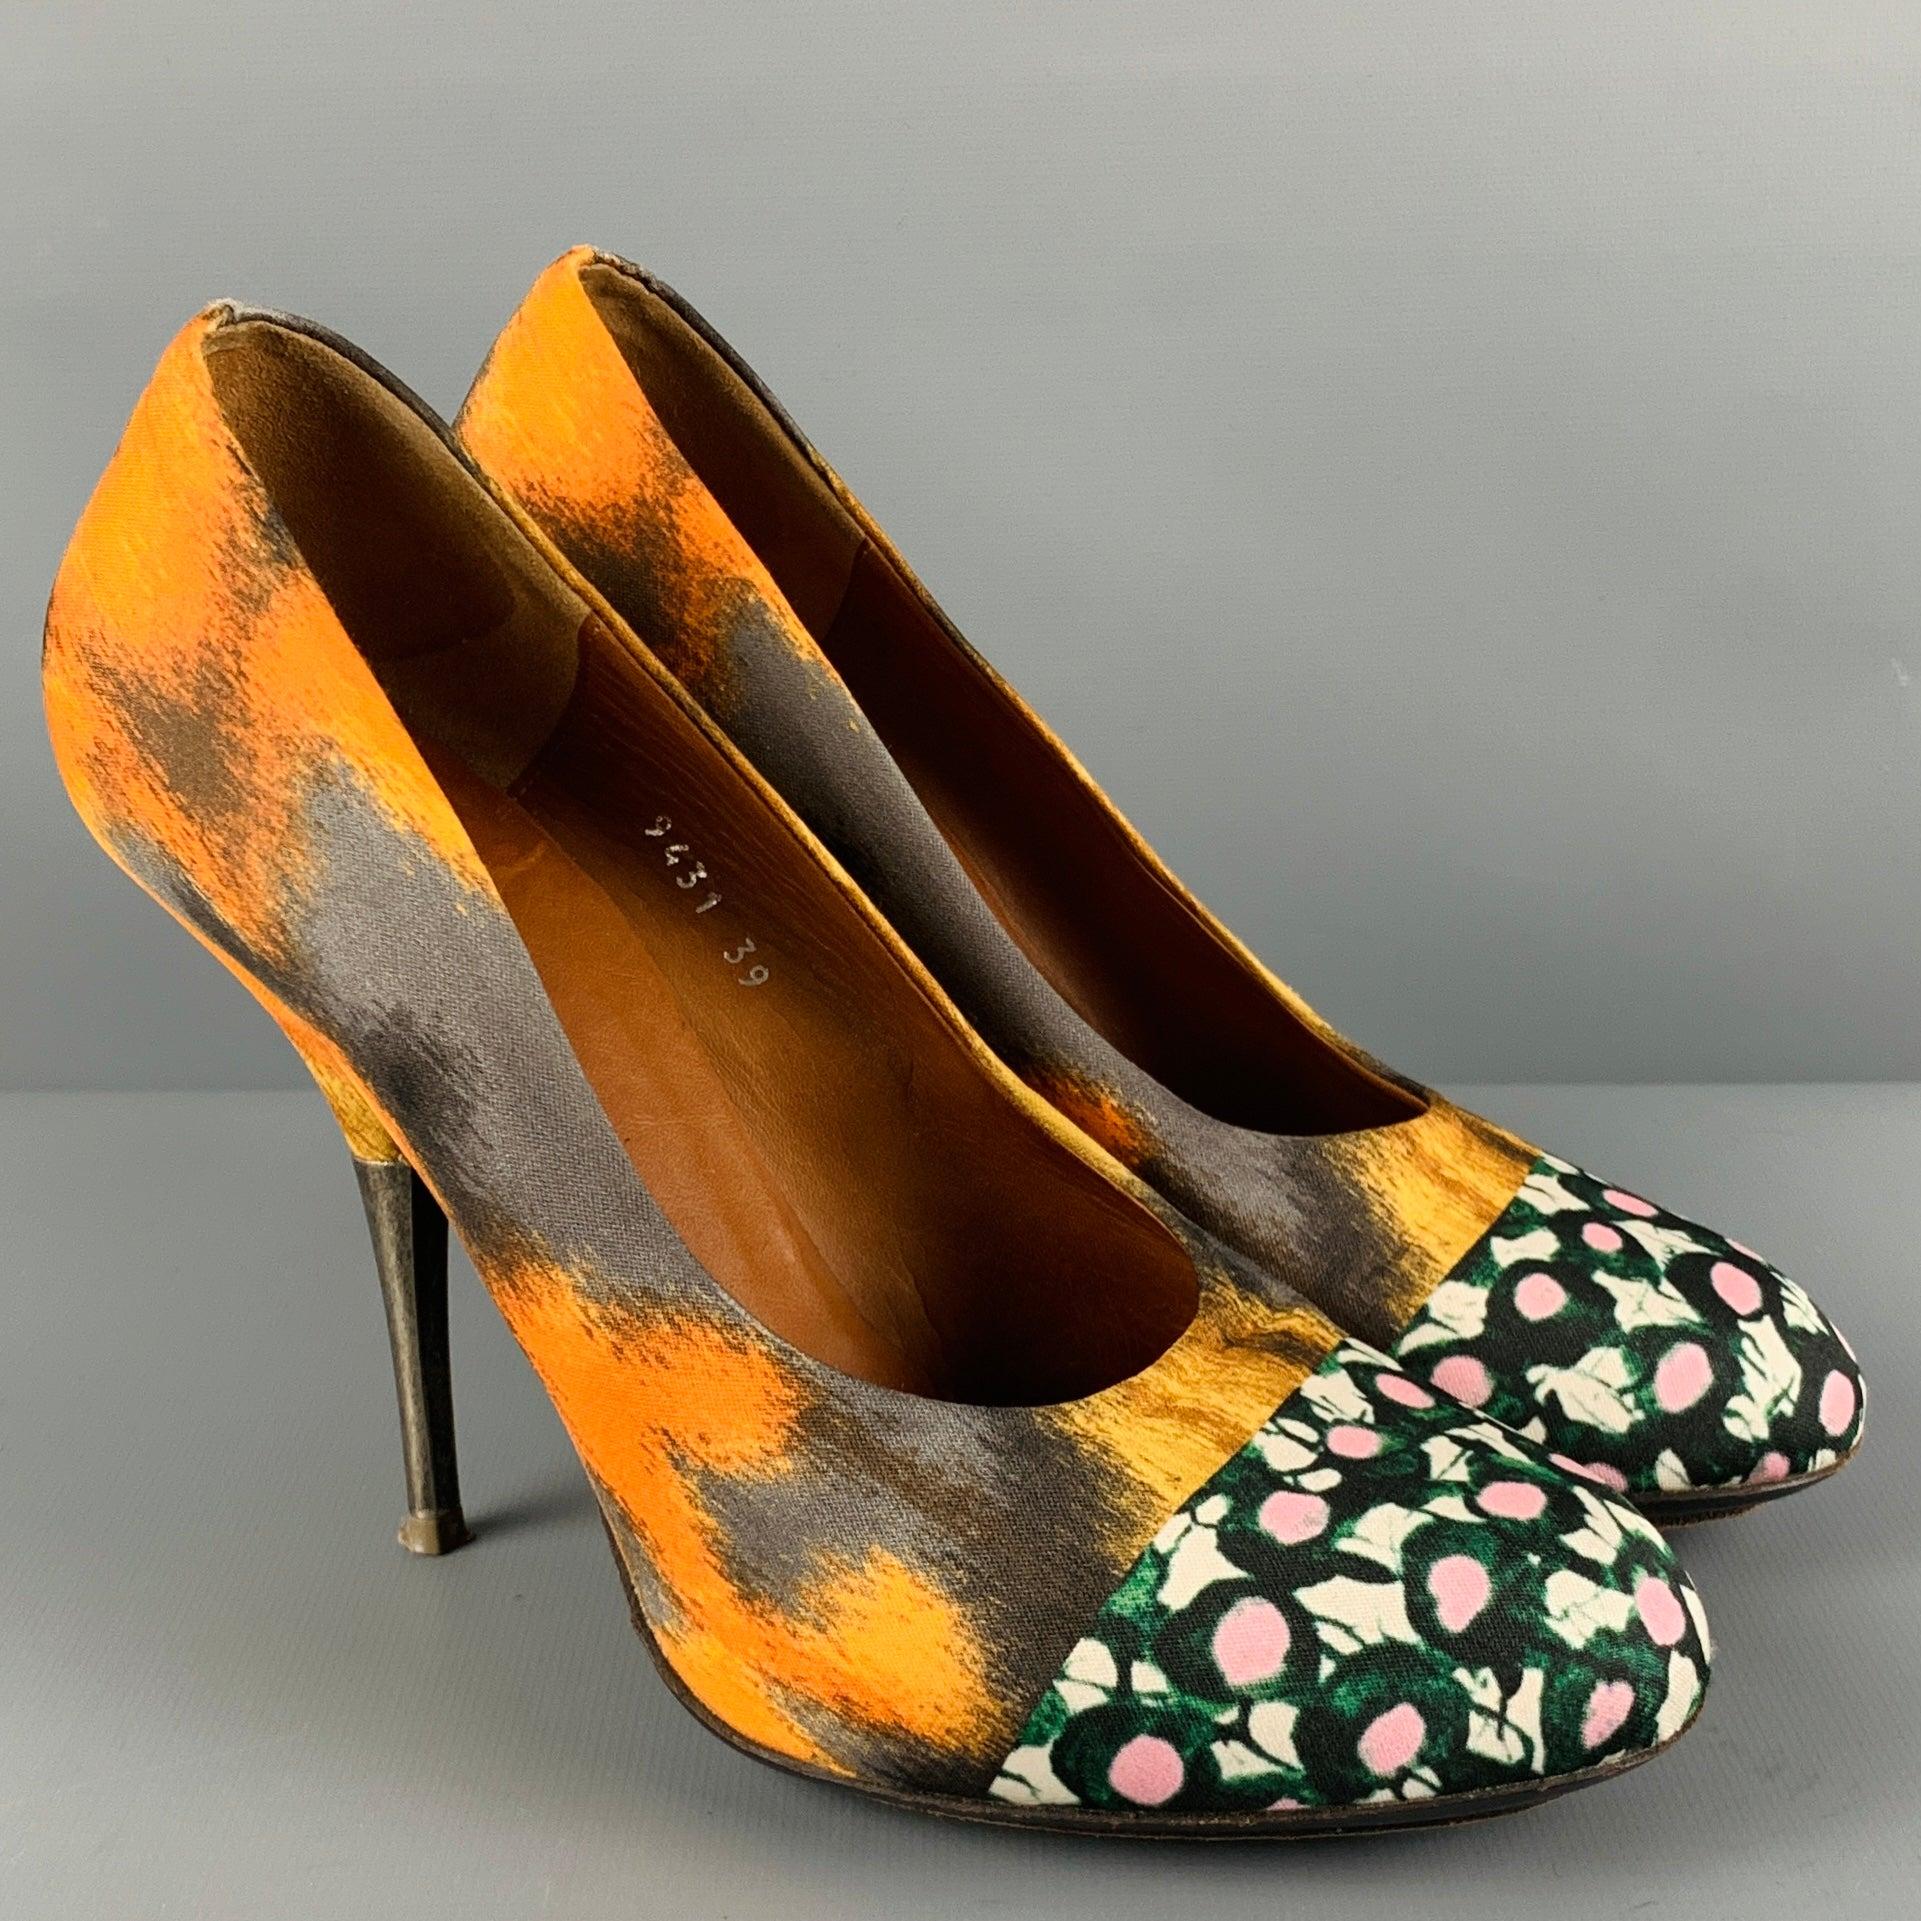 DRIES VAN NOTEN pumps
in a multi-color silk fabric featuring mixed abstract patterns, and shiny silver tone heel.Excellent Pre-Owned Condition. 

Marked:   9431 39 

Measurements: 
  Heel: 4.5 inches 
  
  
 
Reference No.: 128746
Category: